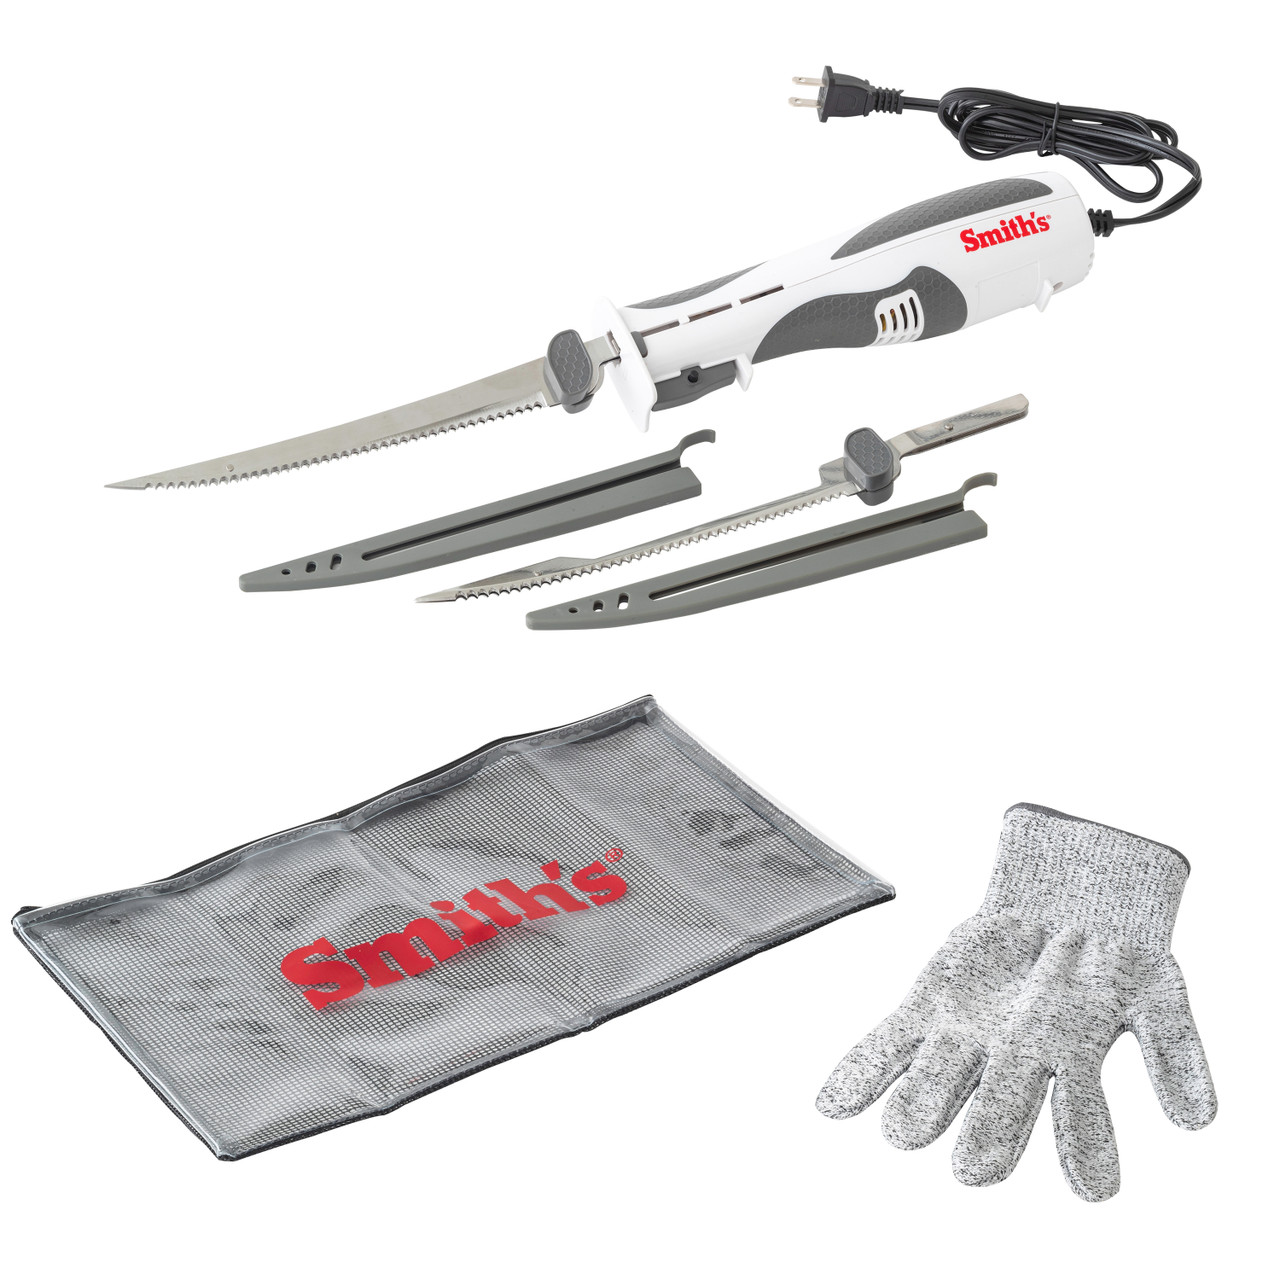 Electric Fillet Knife - Smith's Consumer Products